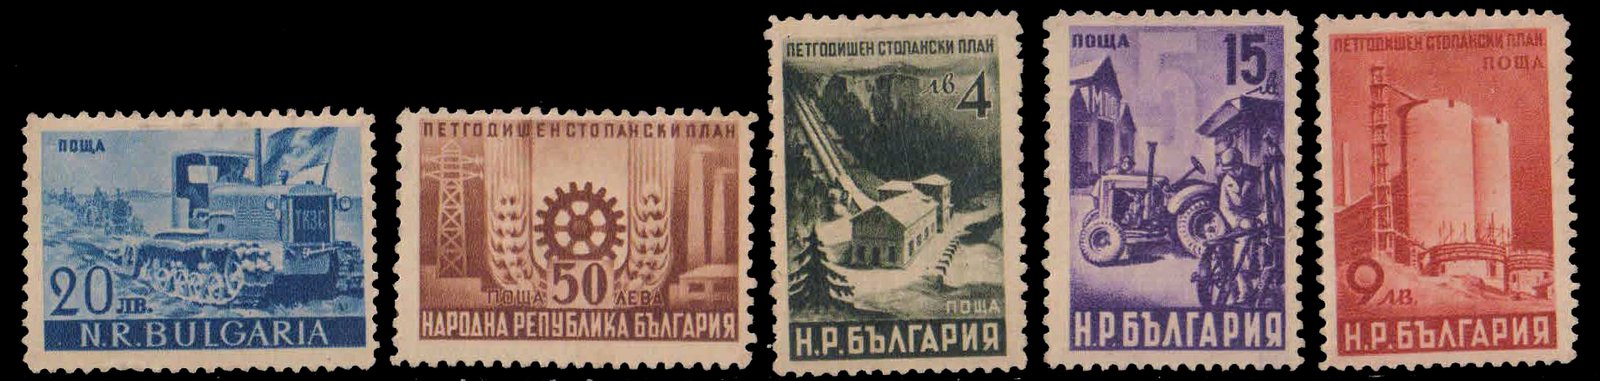 BULGARIA 1949-Agriculture & Industrial Plan, Set of 5, Mint G/W, S.G. 751-755